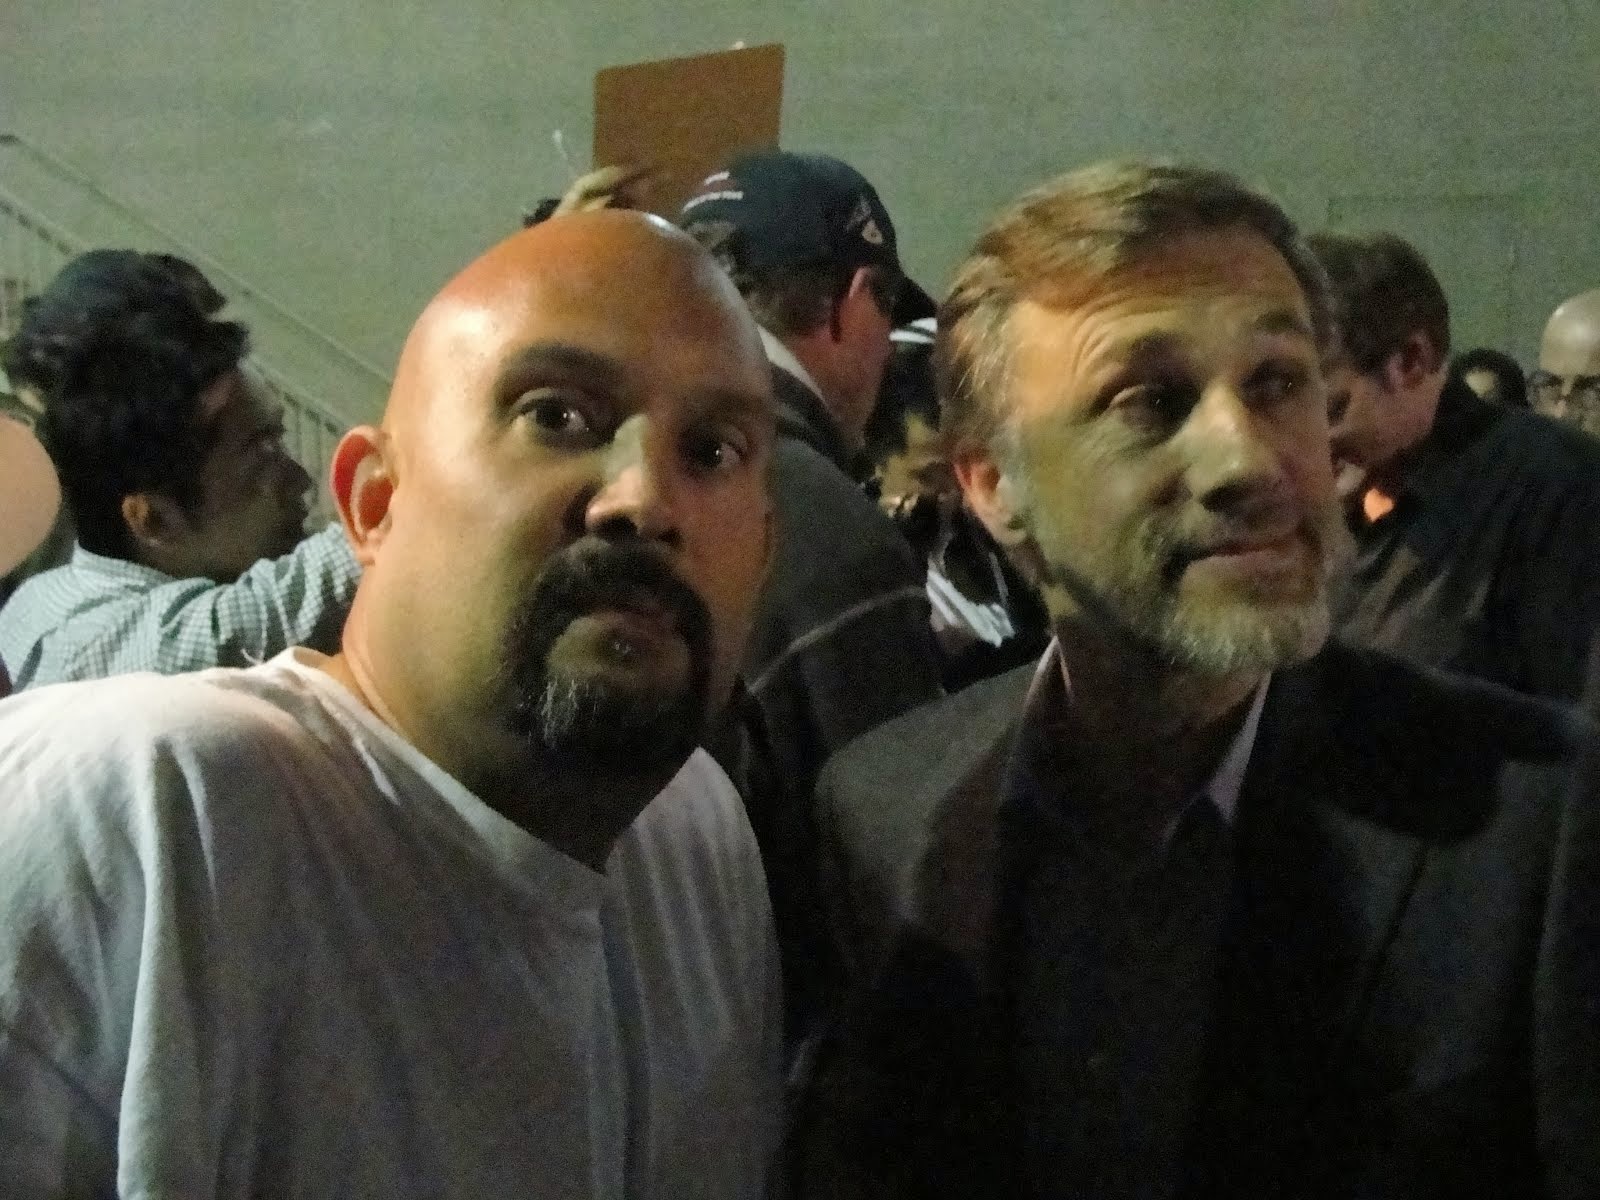 Me and Christoph Waltz